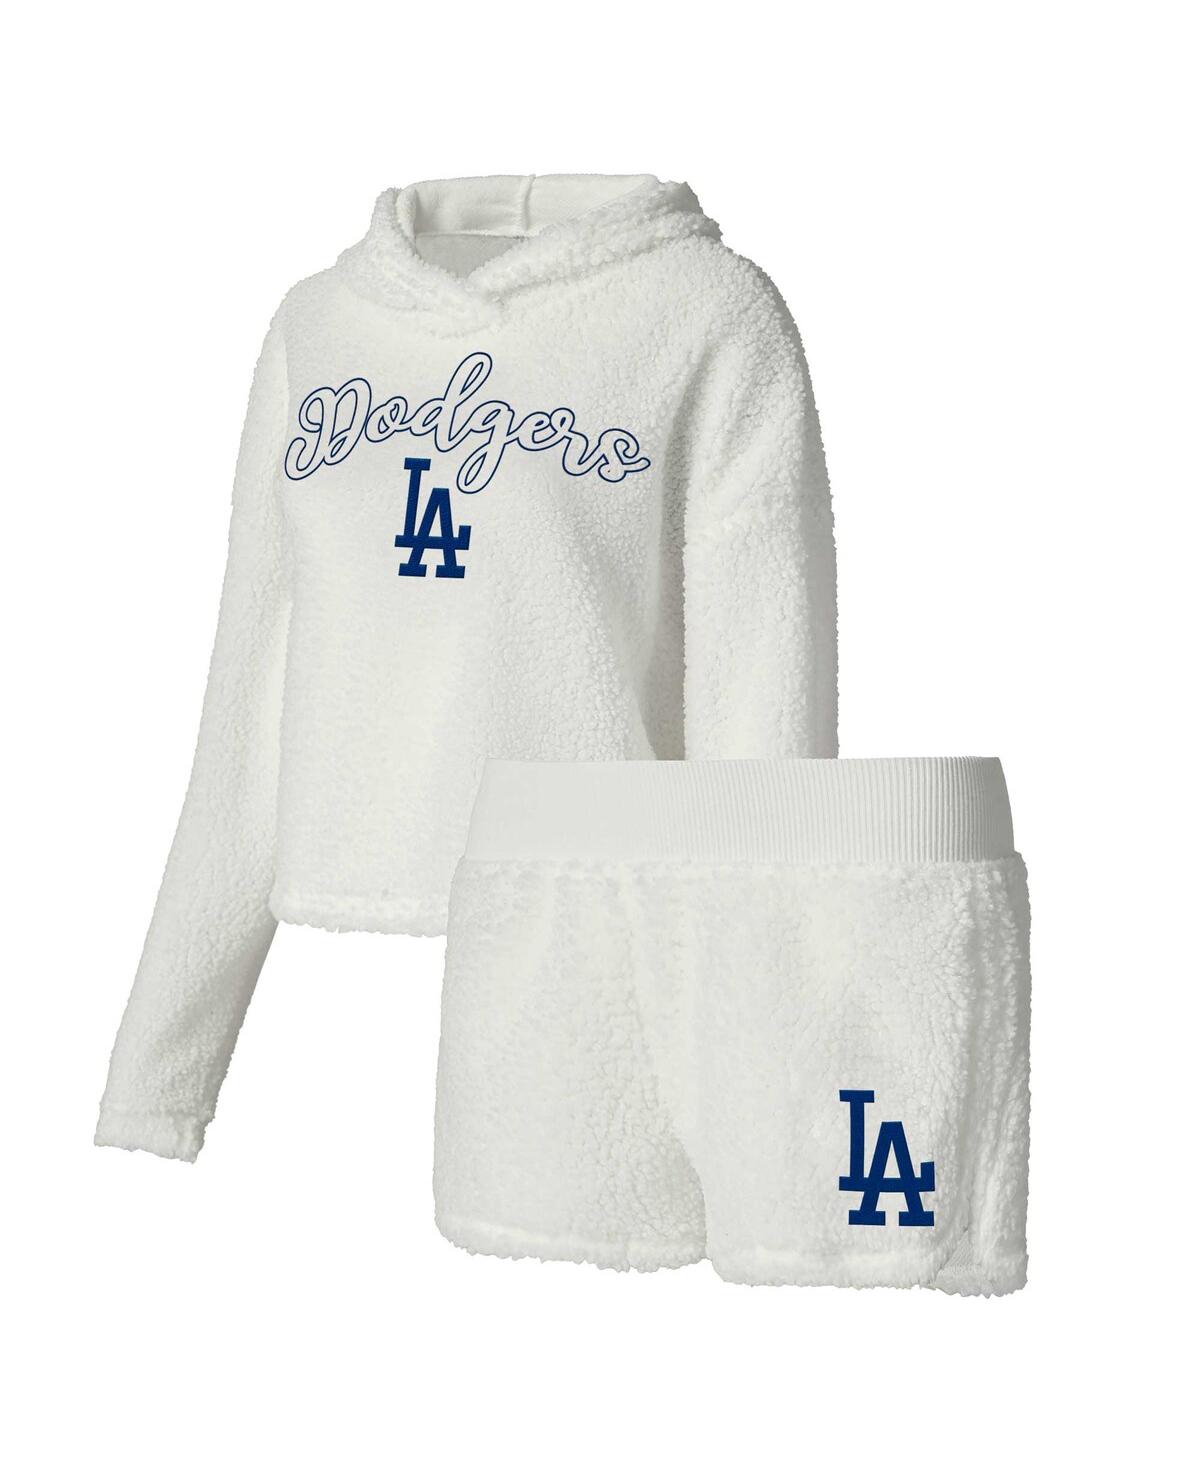 Women's Concepts Sport Cream Los Angeles Dodgers Fluffy Hoodie Top and Shorts Sleep Set - Cream